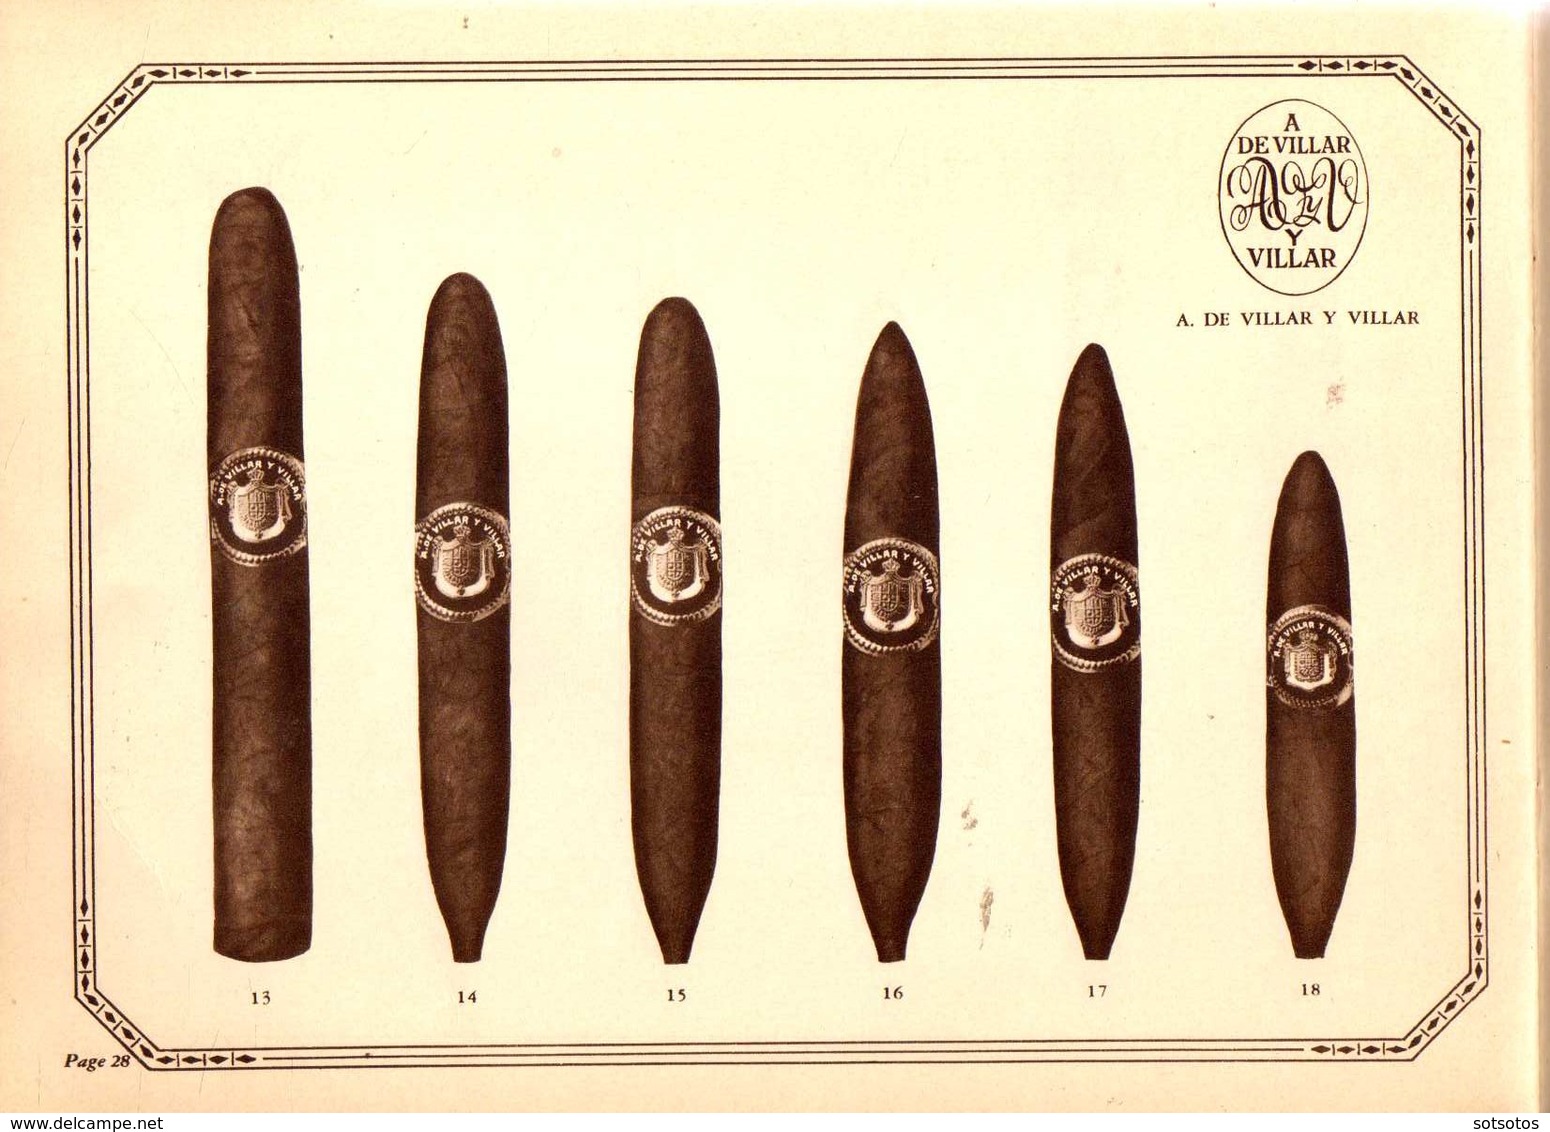 HAVANA TOBACCO CIGARS: Henry Clay and Bock & Co Ltd NICE with 40 pages of photos